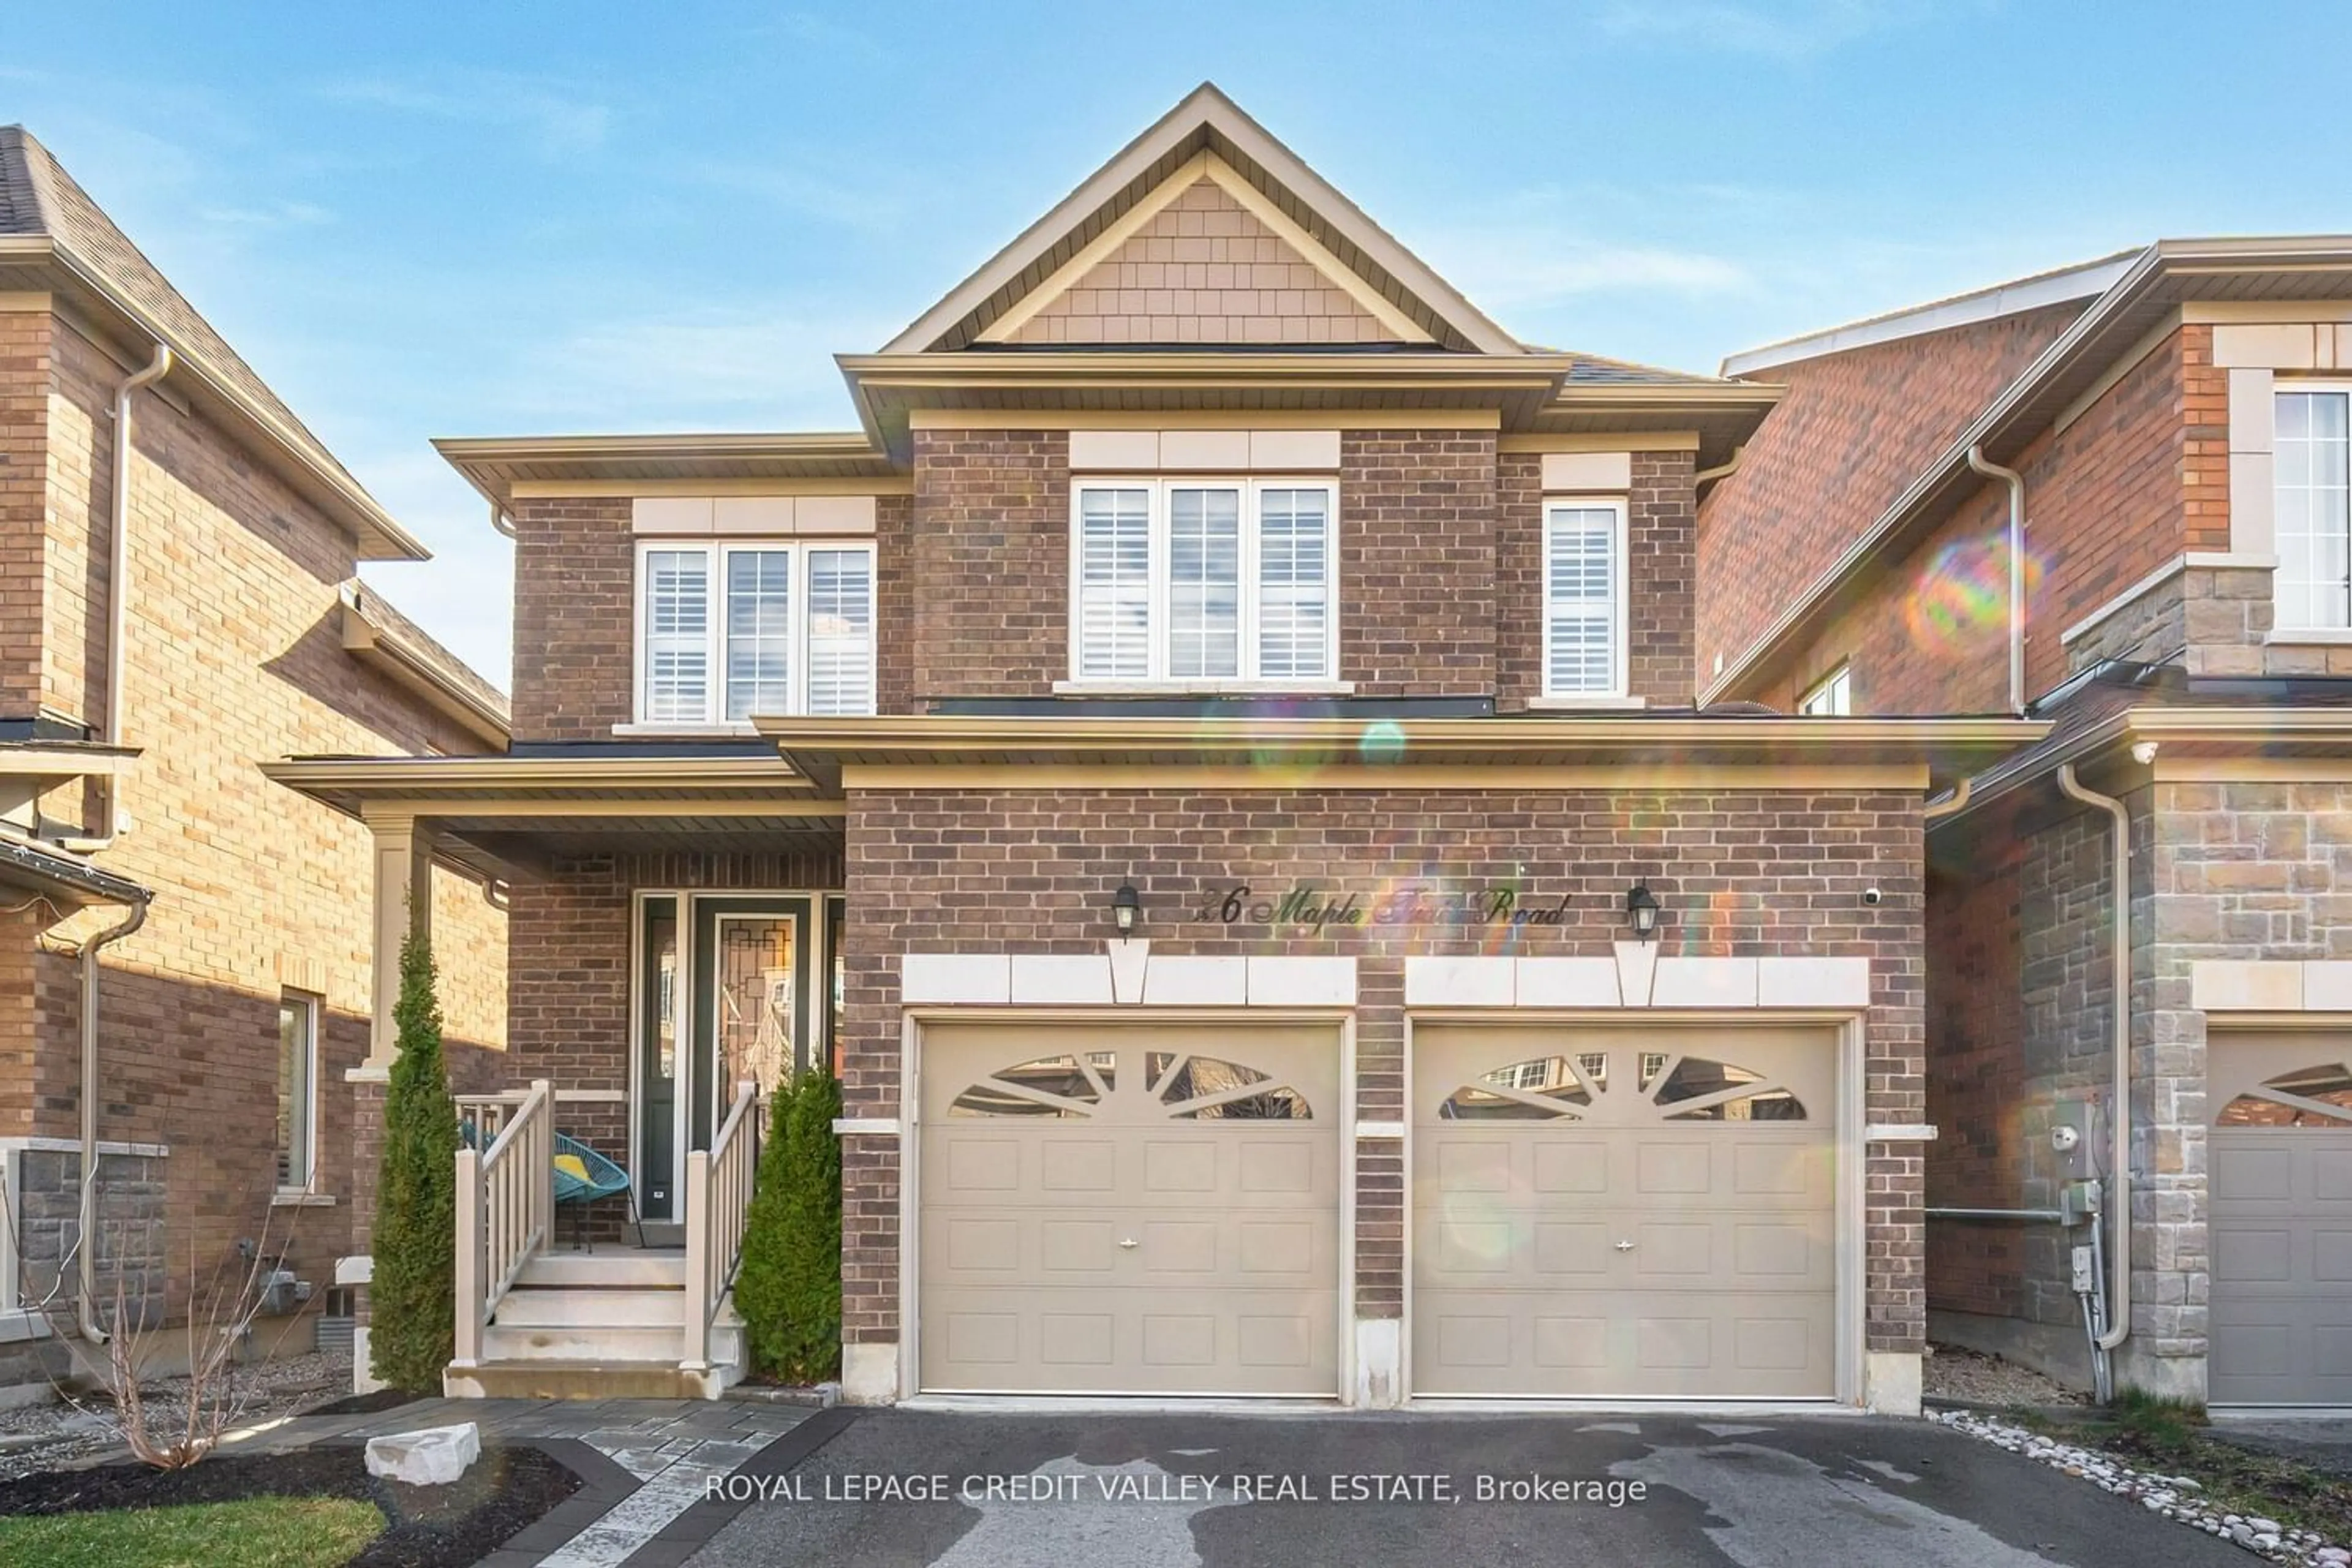 Home with brick exterior material for 26 Maple Tr, Caledon Ontario L7C 2C7